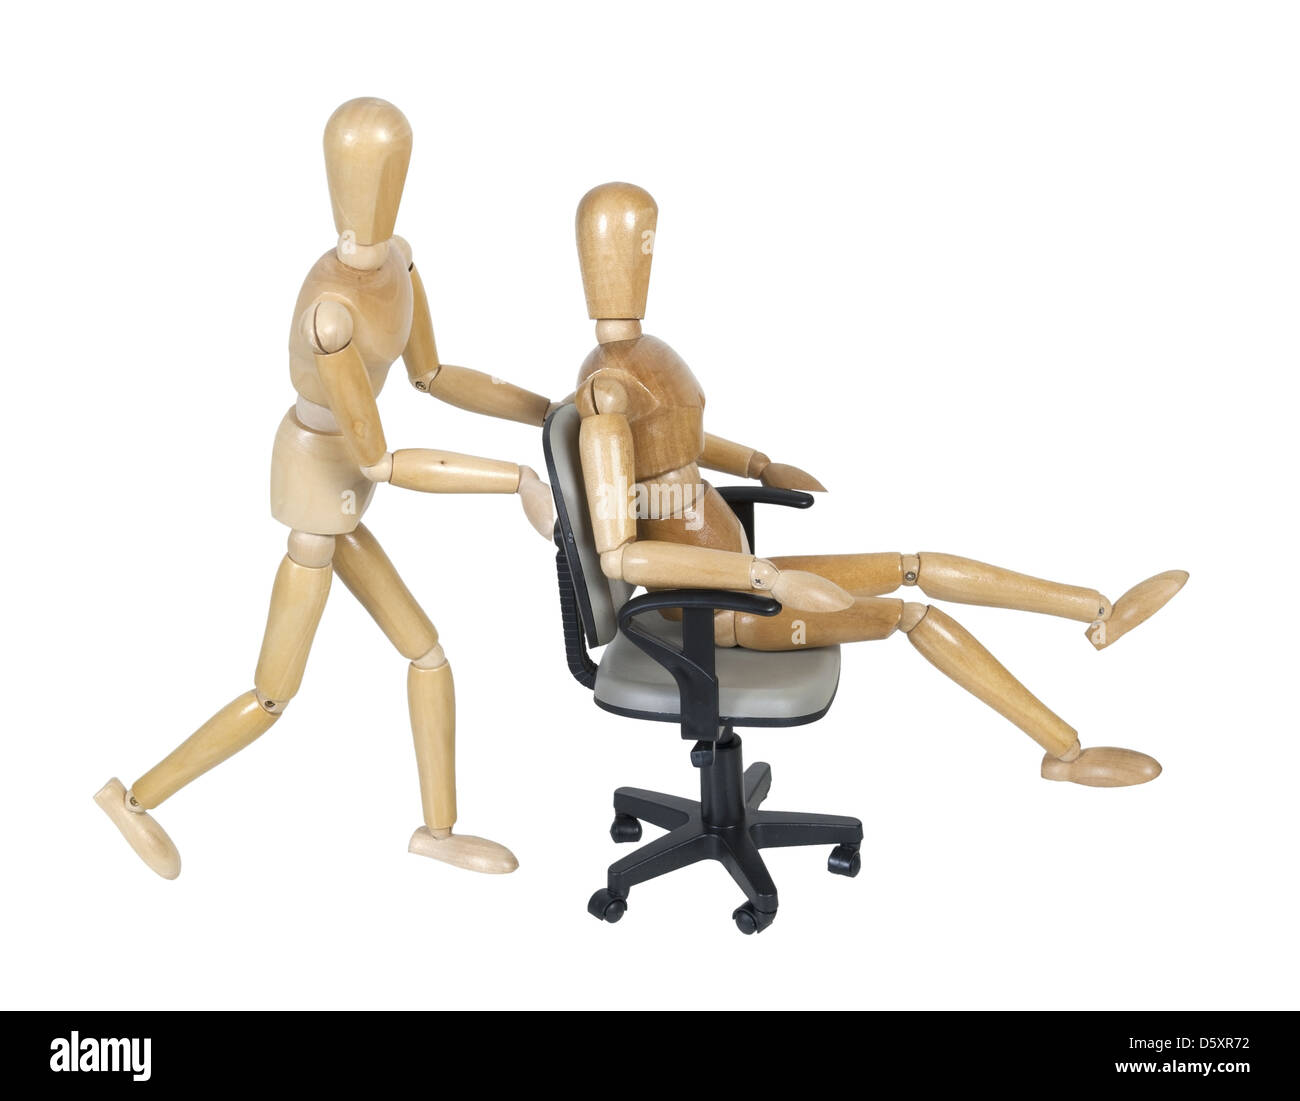 Pushing another rider in an adjustable office chair race - path included Stock Photo